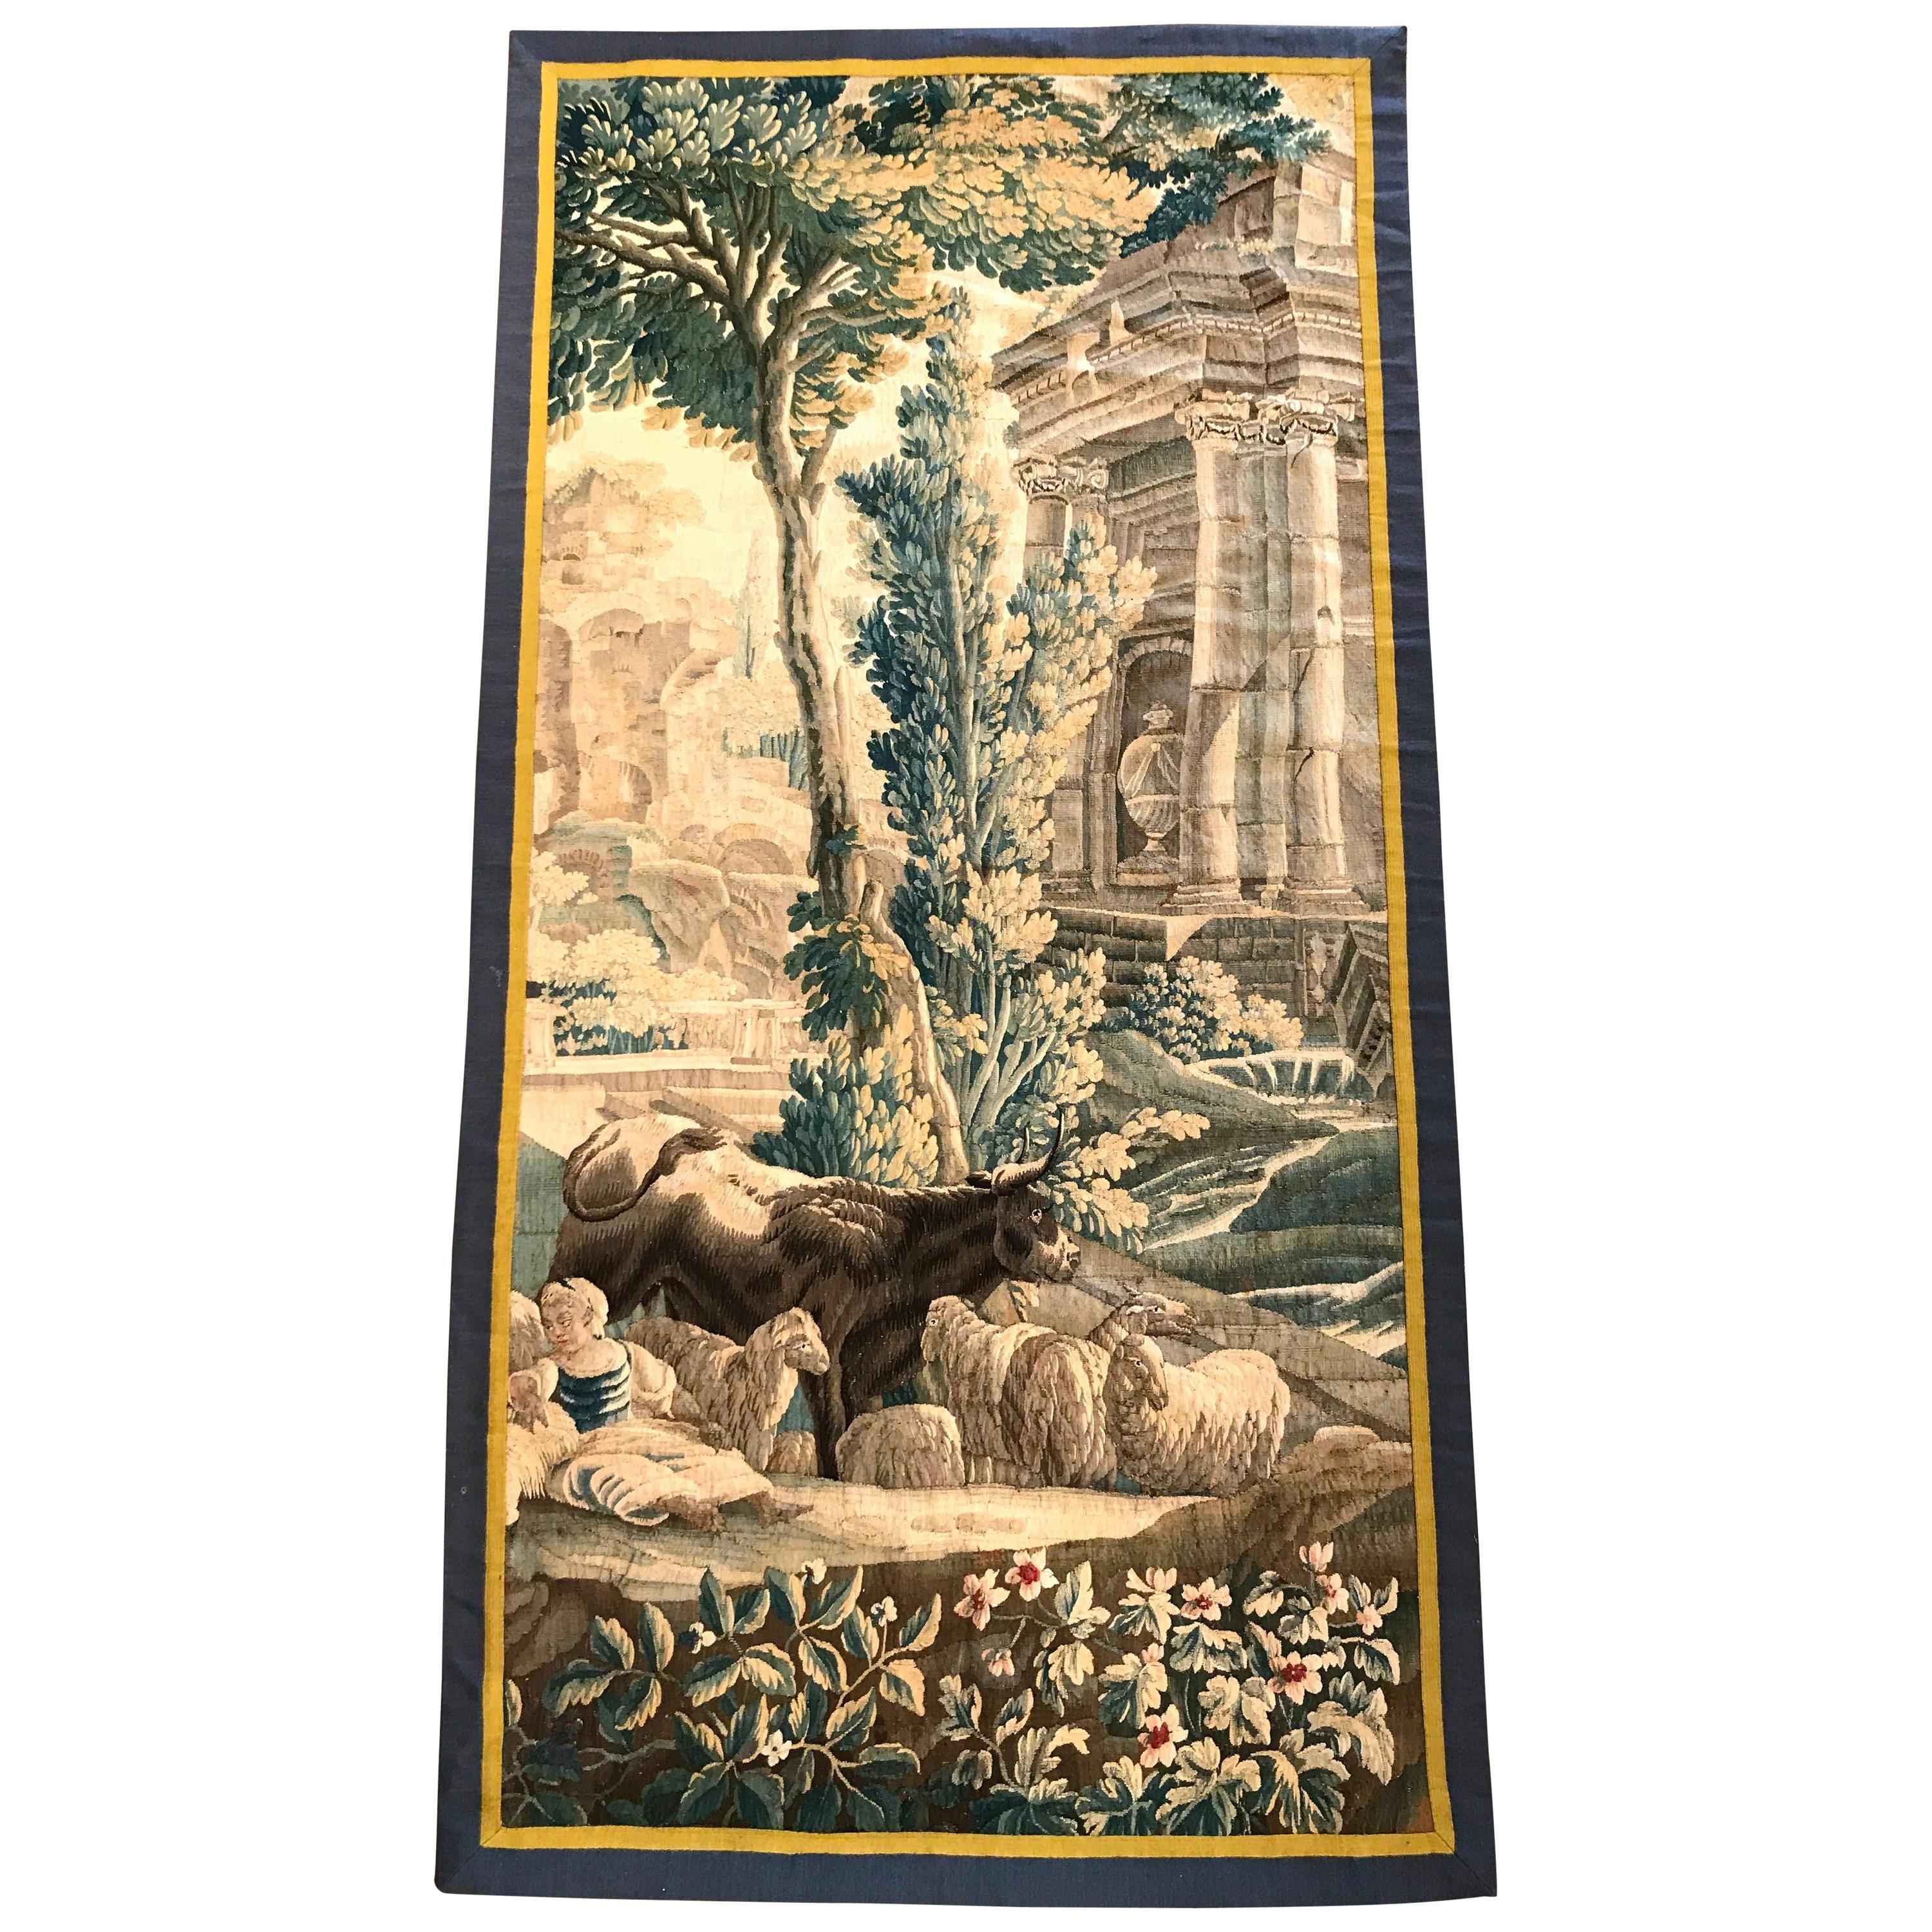 18th Century French Aubusson Tapestry with Cow Sheep Shepherd and Roman Palace